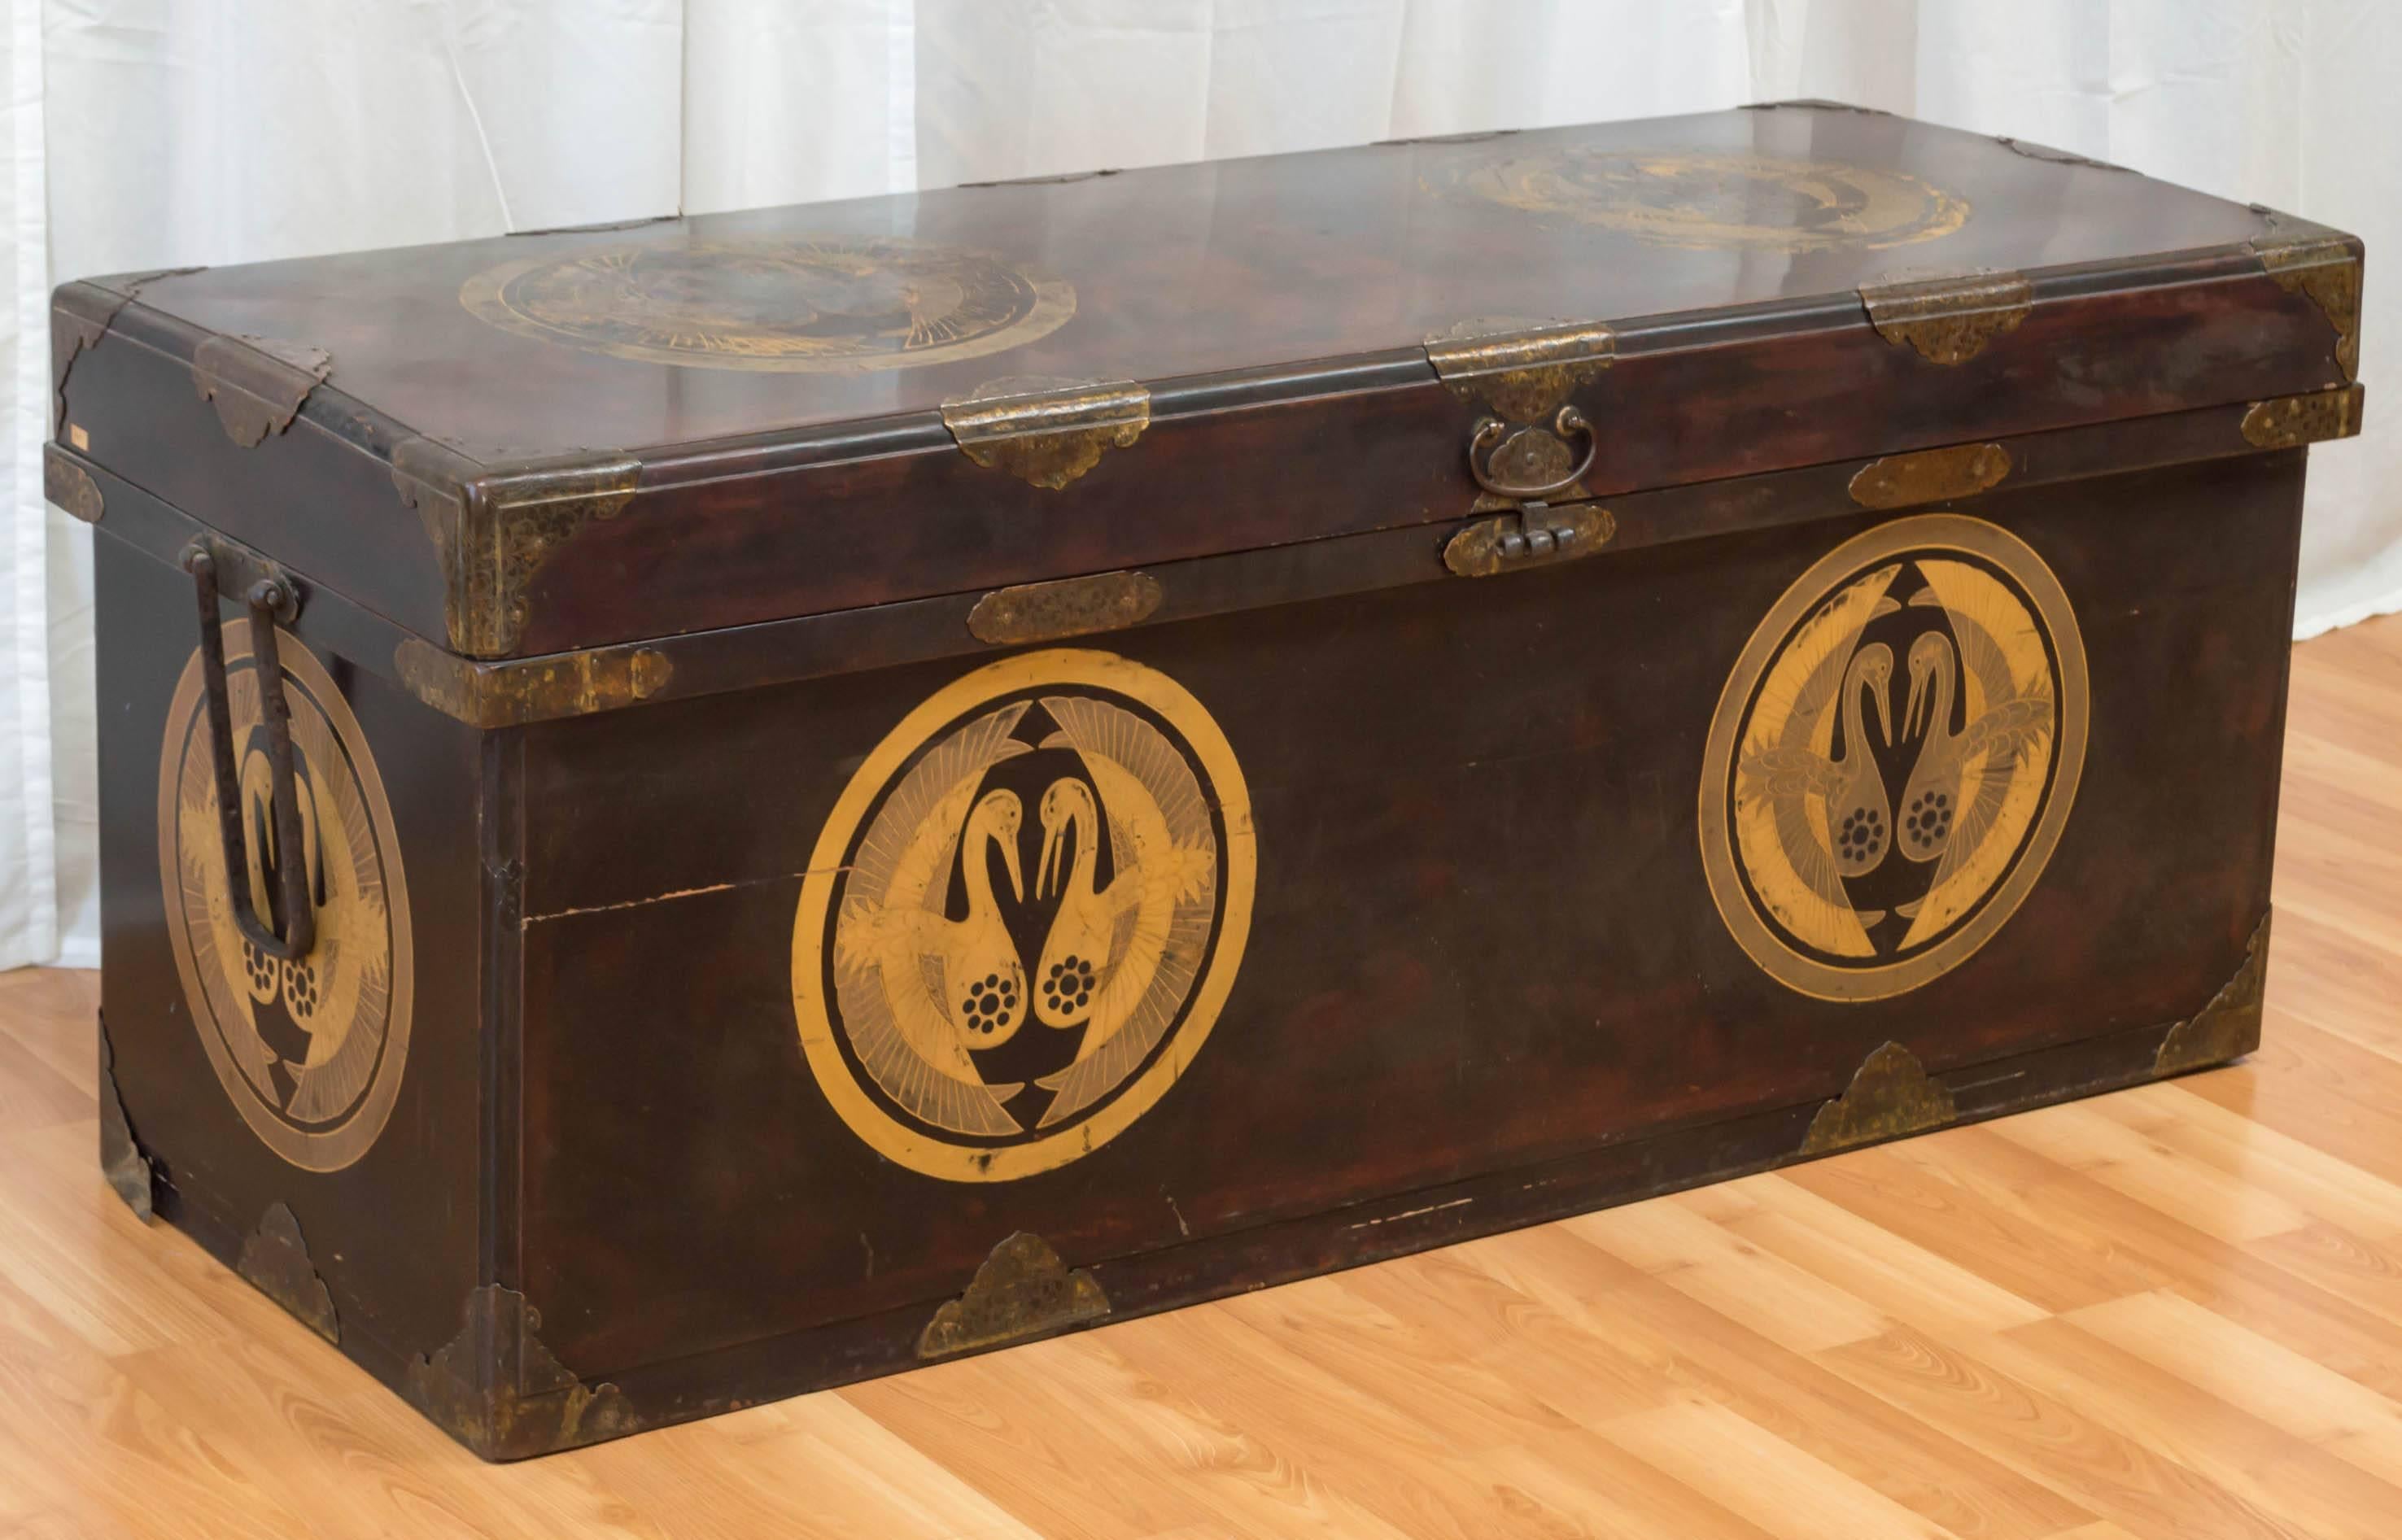 A very large wood Japanese wedding or storage chest or trunk, late-Meiji or early-Taishō period. Embellished with a beautiful gold kamon motif, brass accents, and rice paper lining.

Chest is constructed of a rich mahogany-like wood, and has a